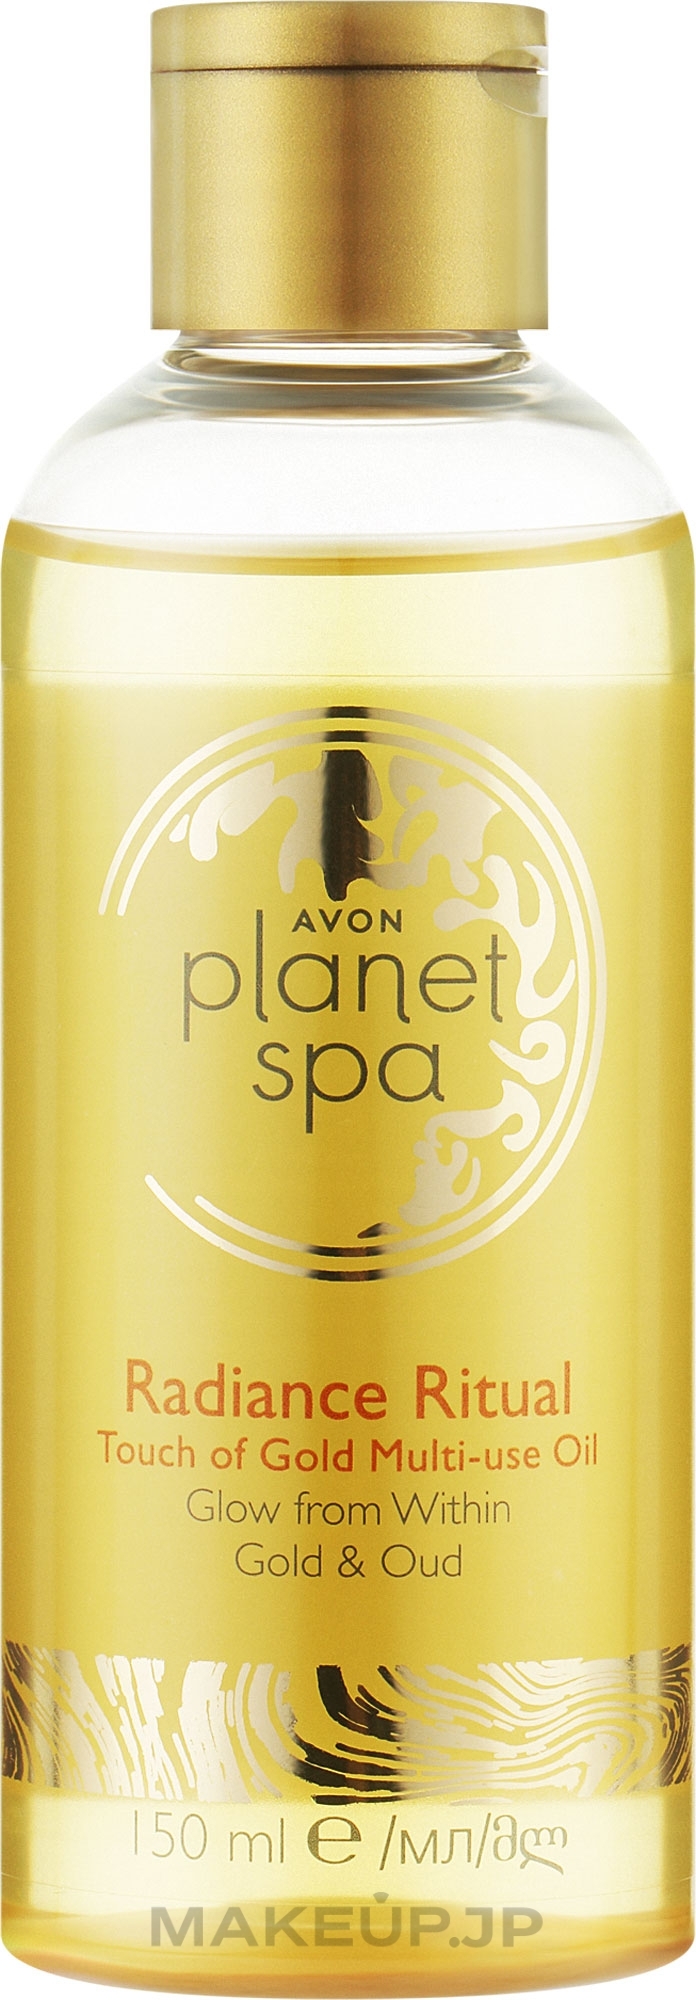 Moisturizing Bath and Body Oil - Avon Planet Spa Radiance Ritual Touch Of Gold Multi-use Oil — photo 150 ml